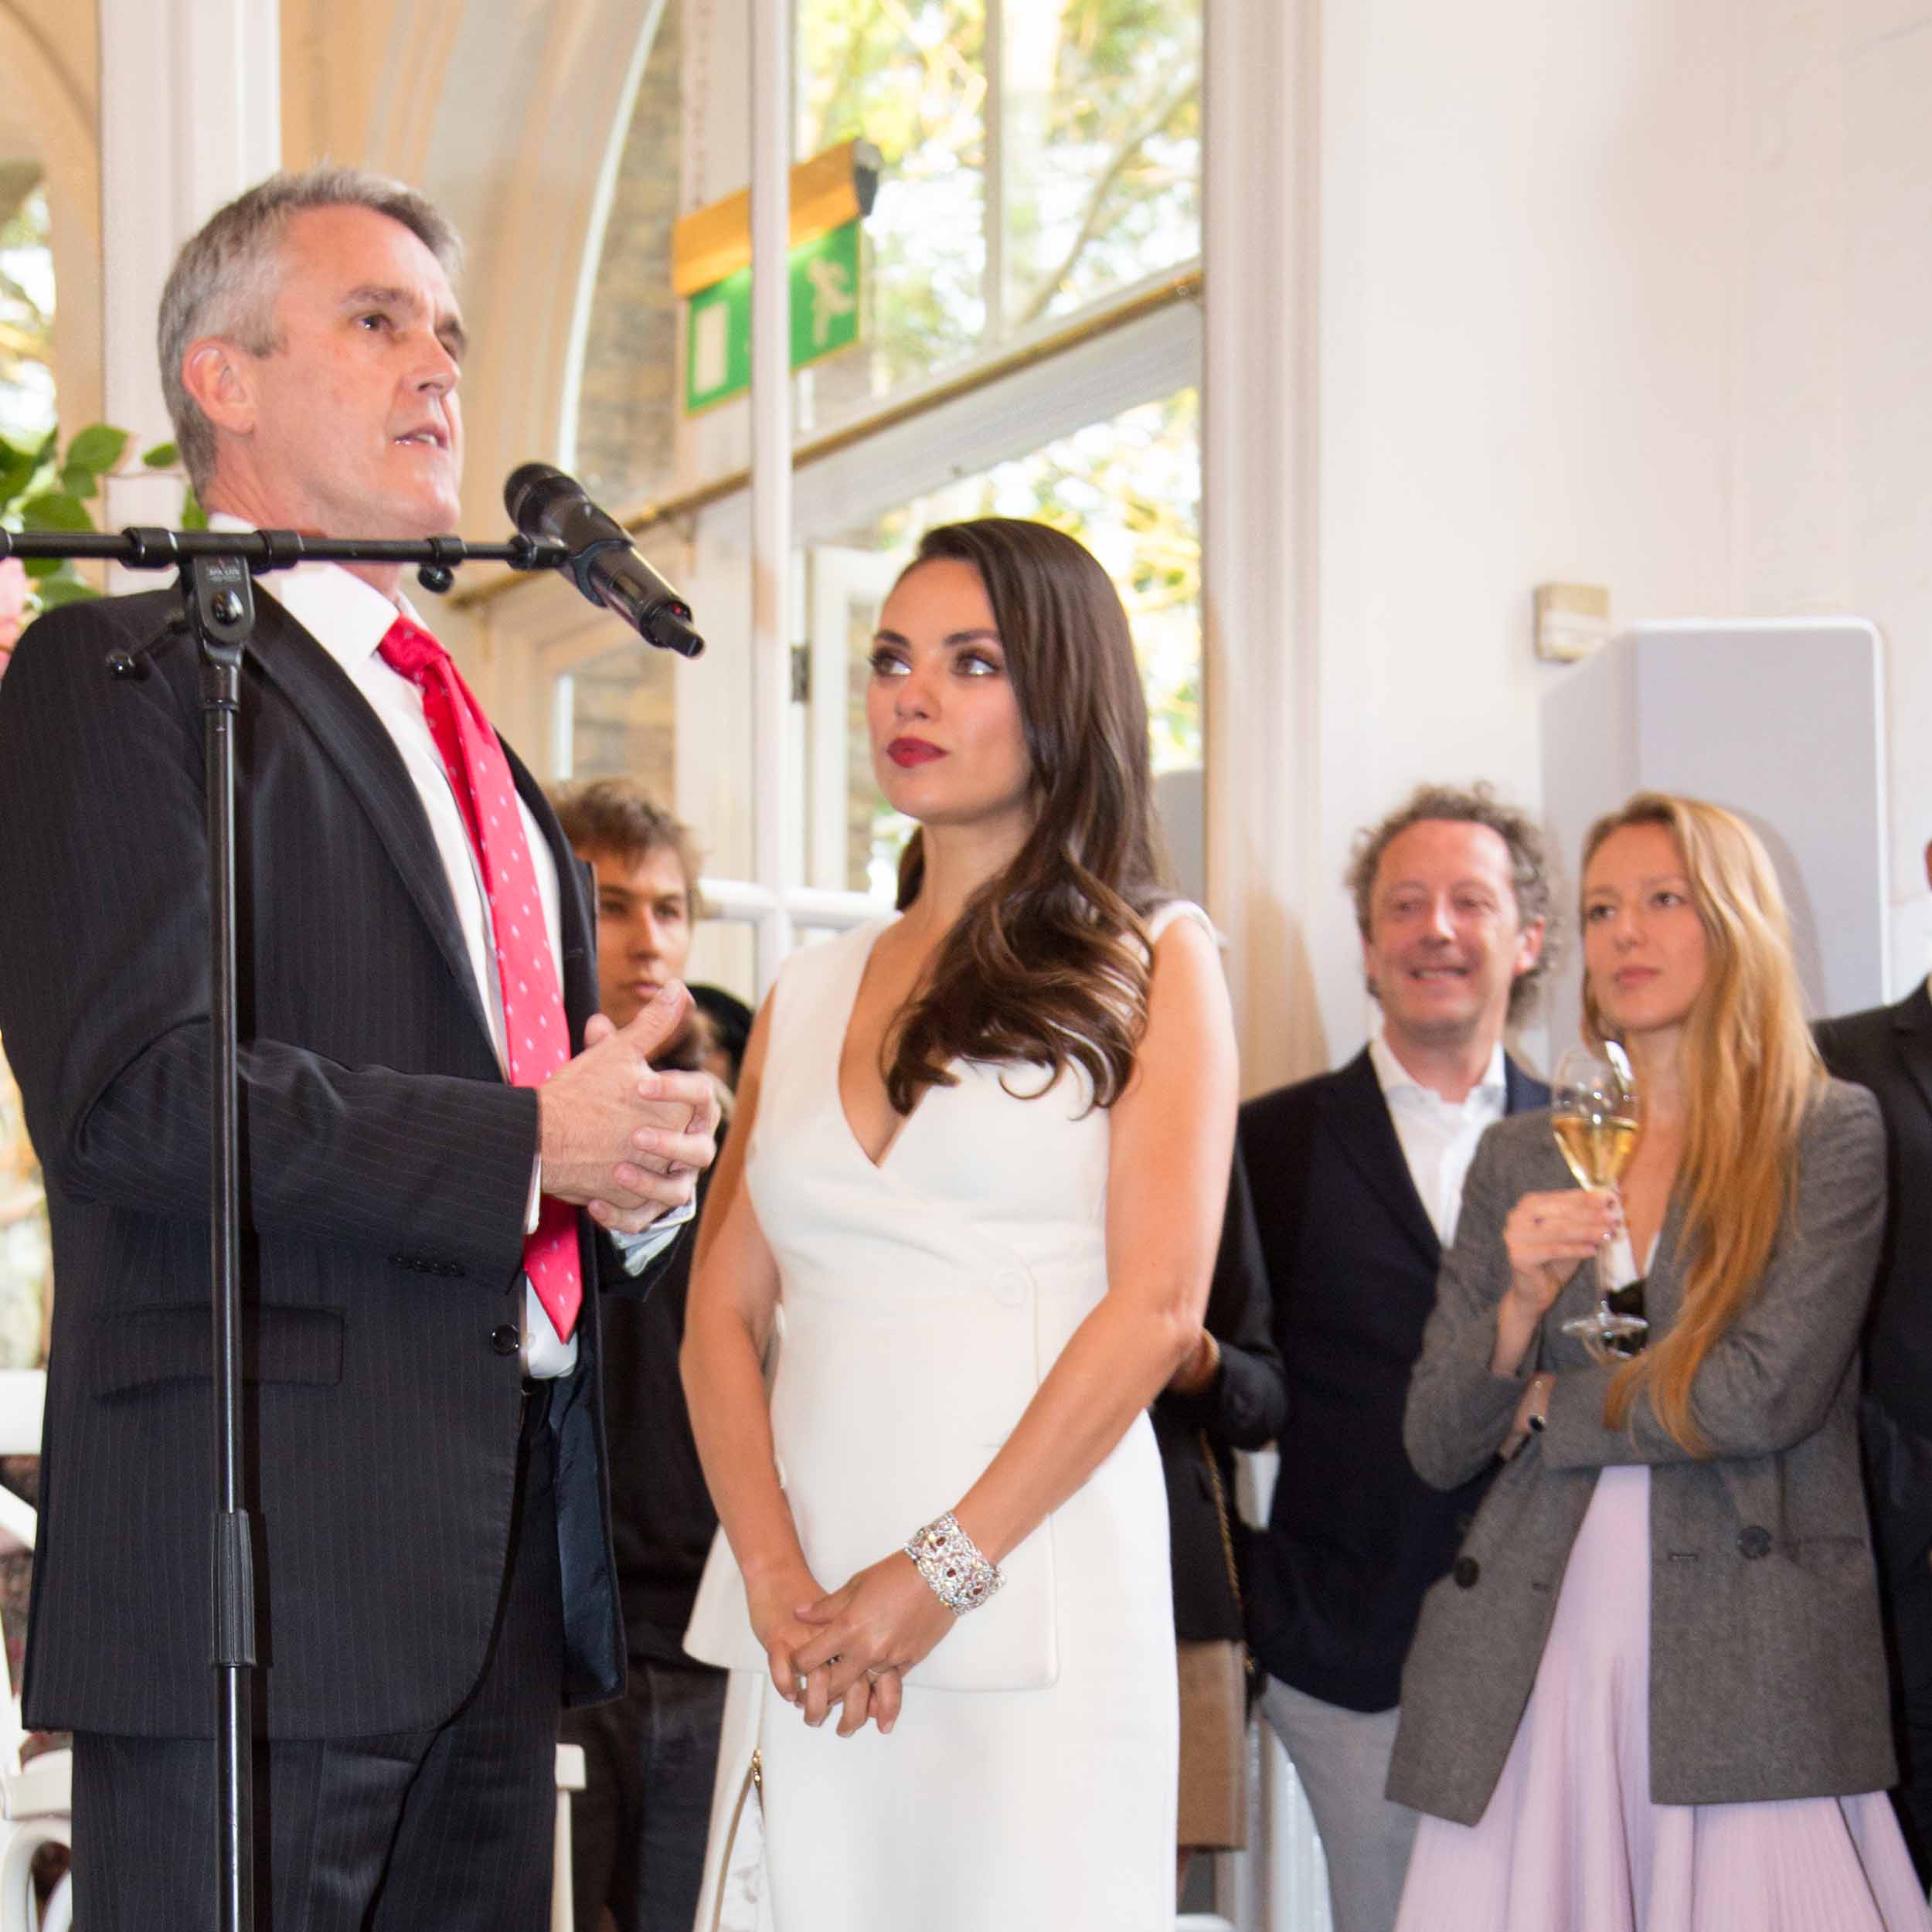 MILA KUNIS, THE FACE OF GEMFIELDS, SHINES AT RUBY LAUNCH: THE ORANGERY, HOLLAND PARK LONDON